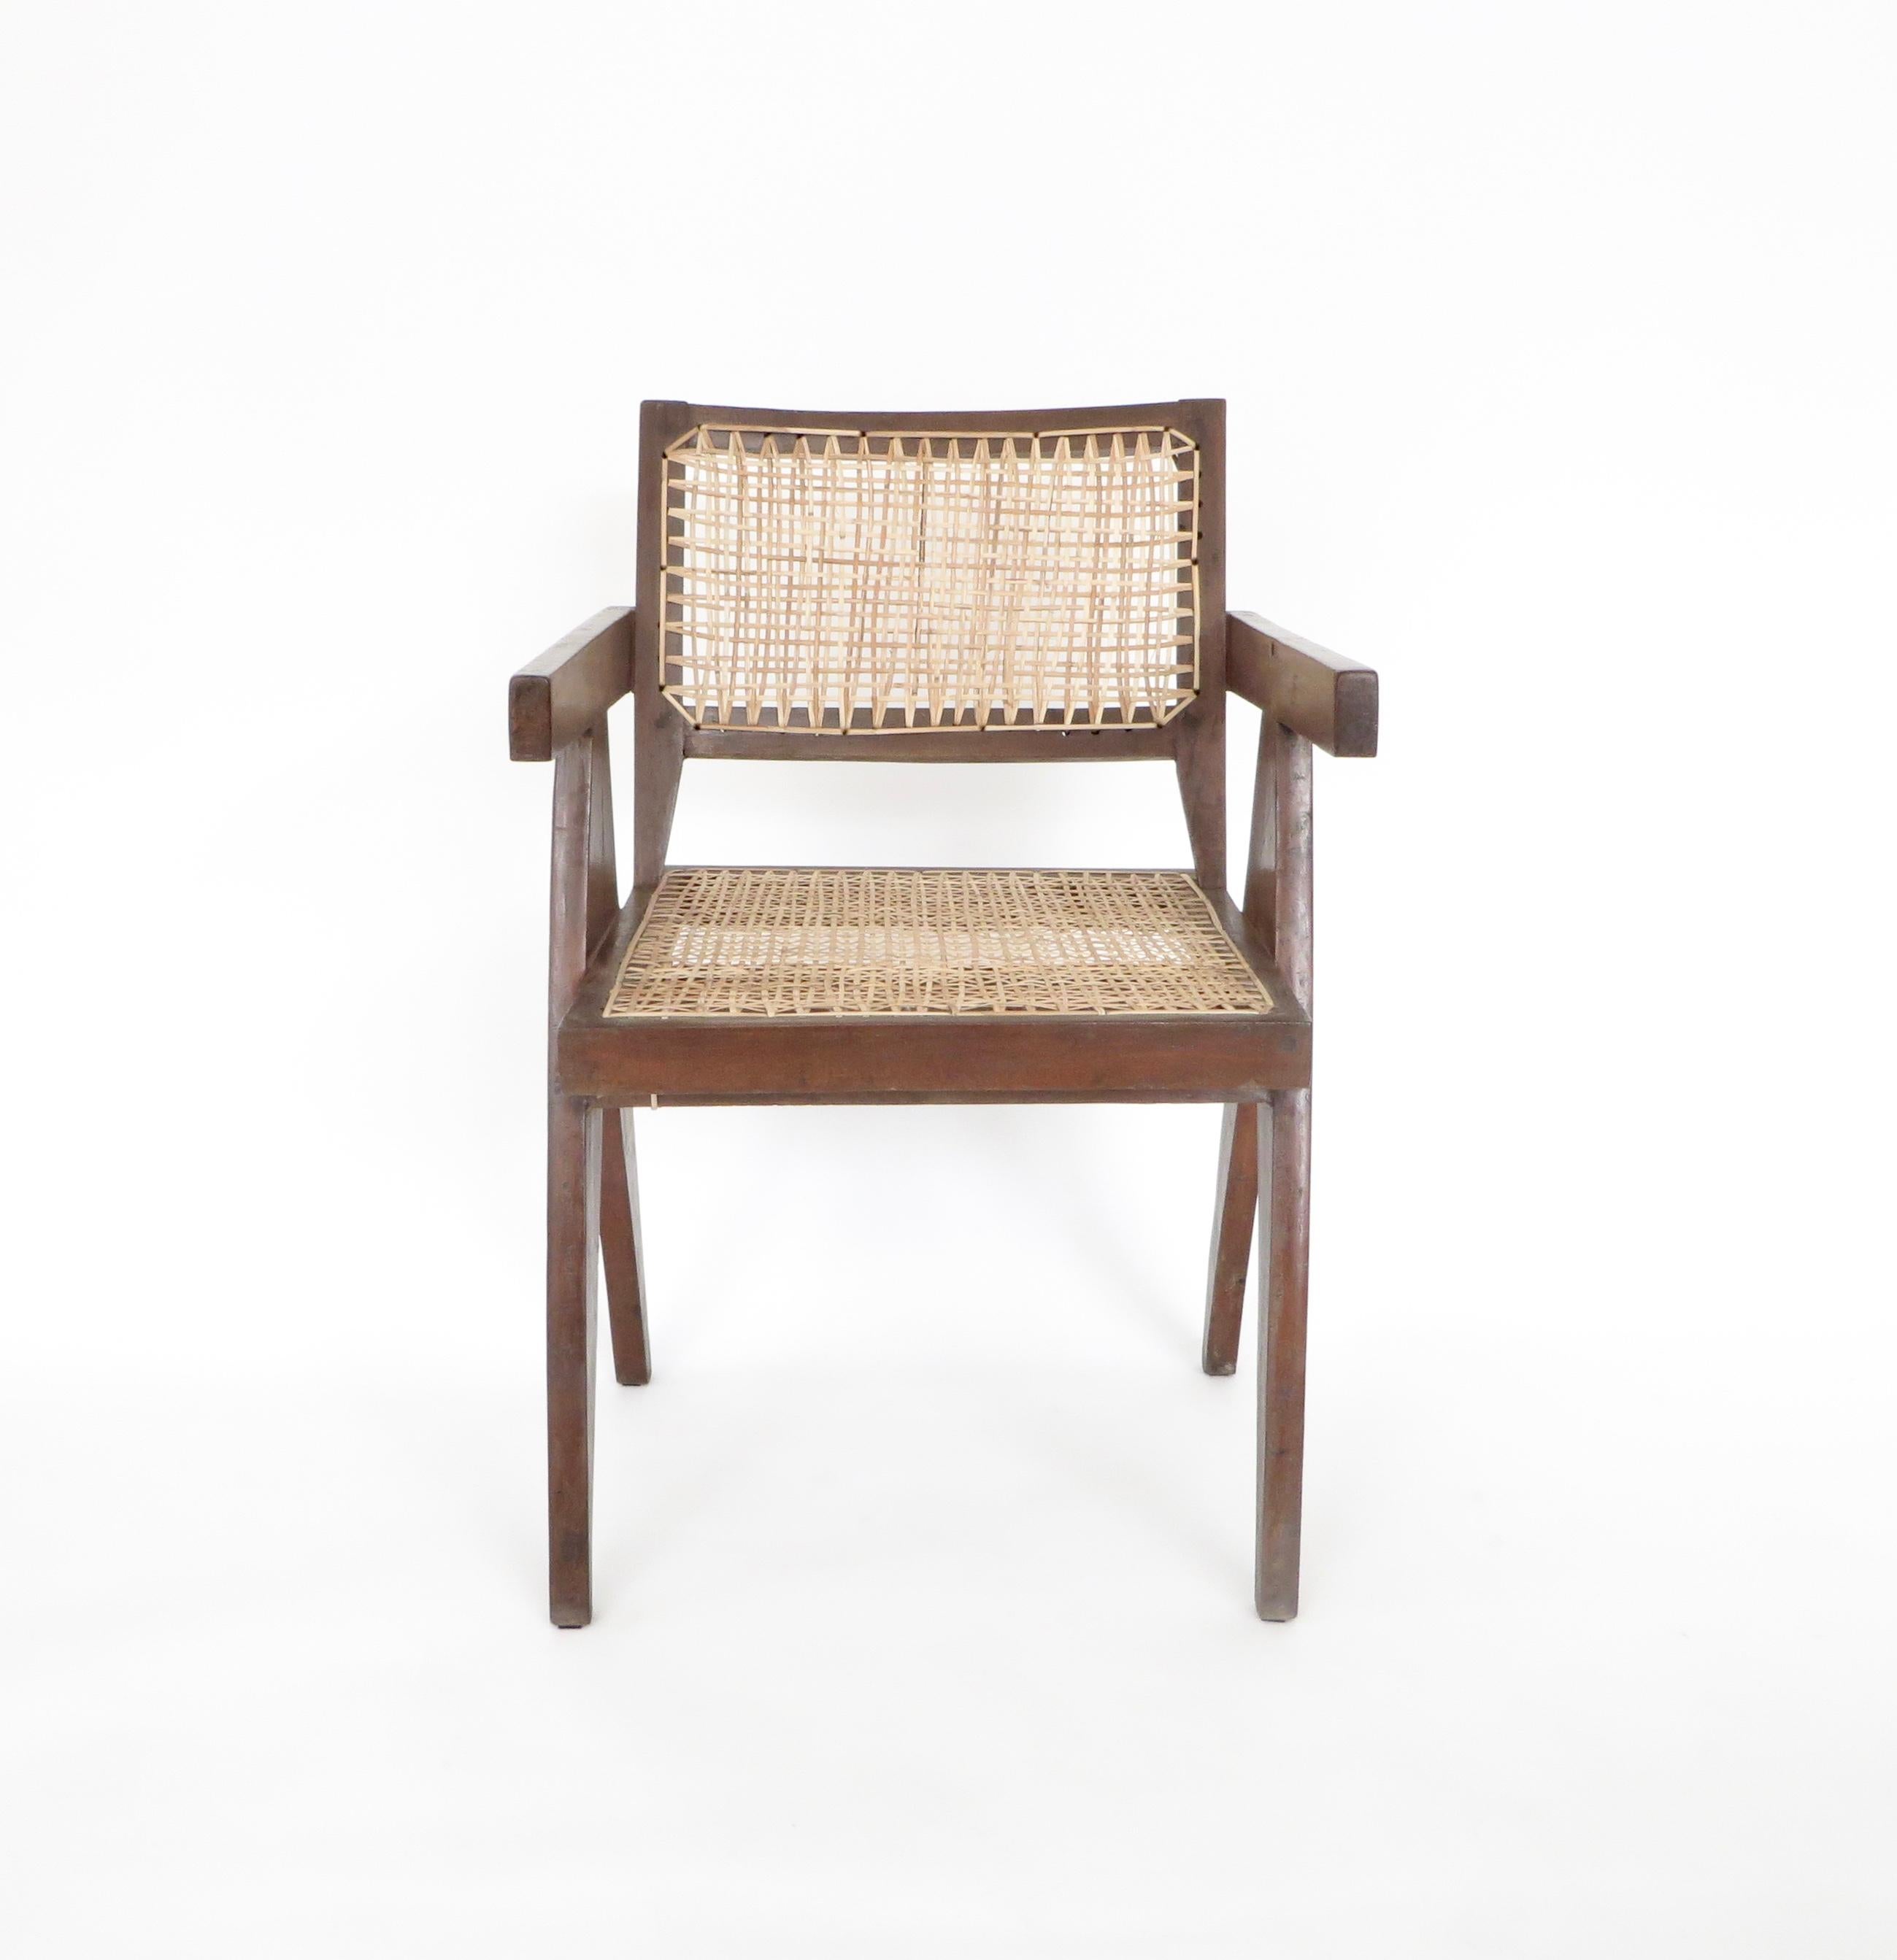 Pierre Jeanneret Teak and Cane Office Vintage Original Armchair from Chandigarh 1